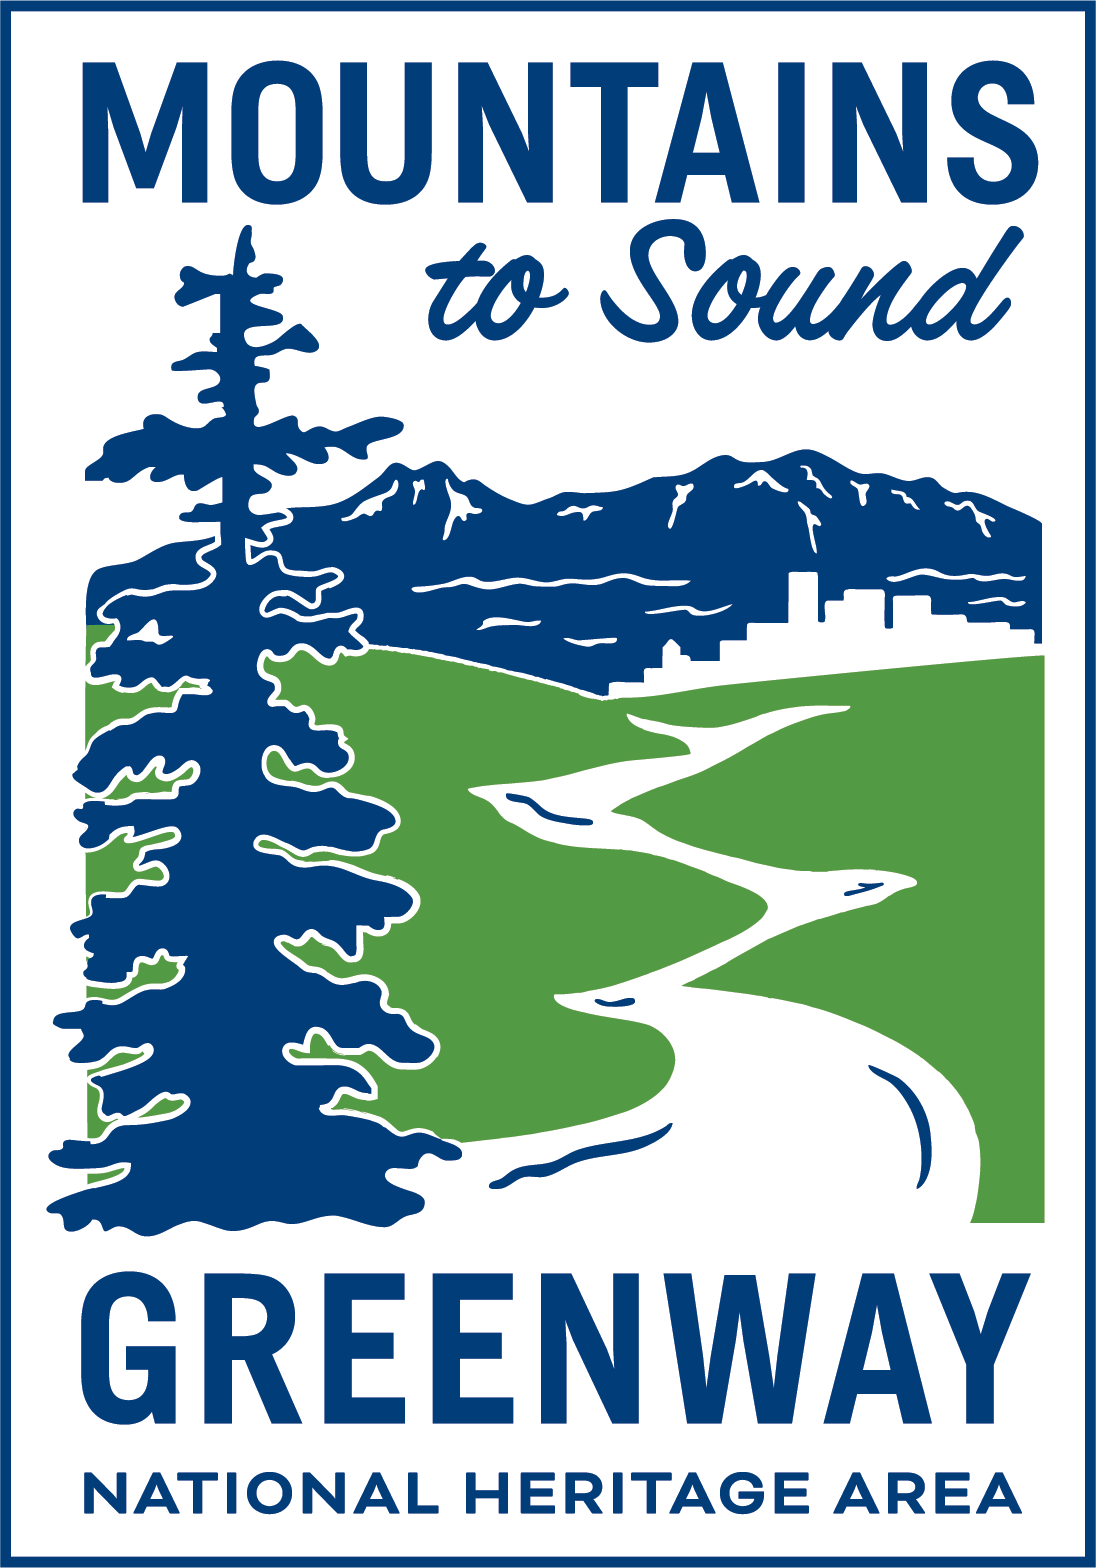 Mountains to Sound Greenway National Heritage Area